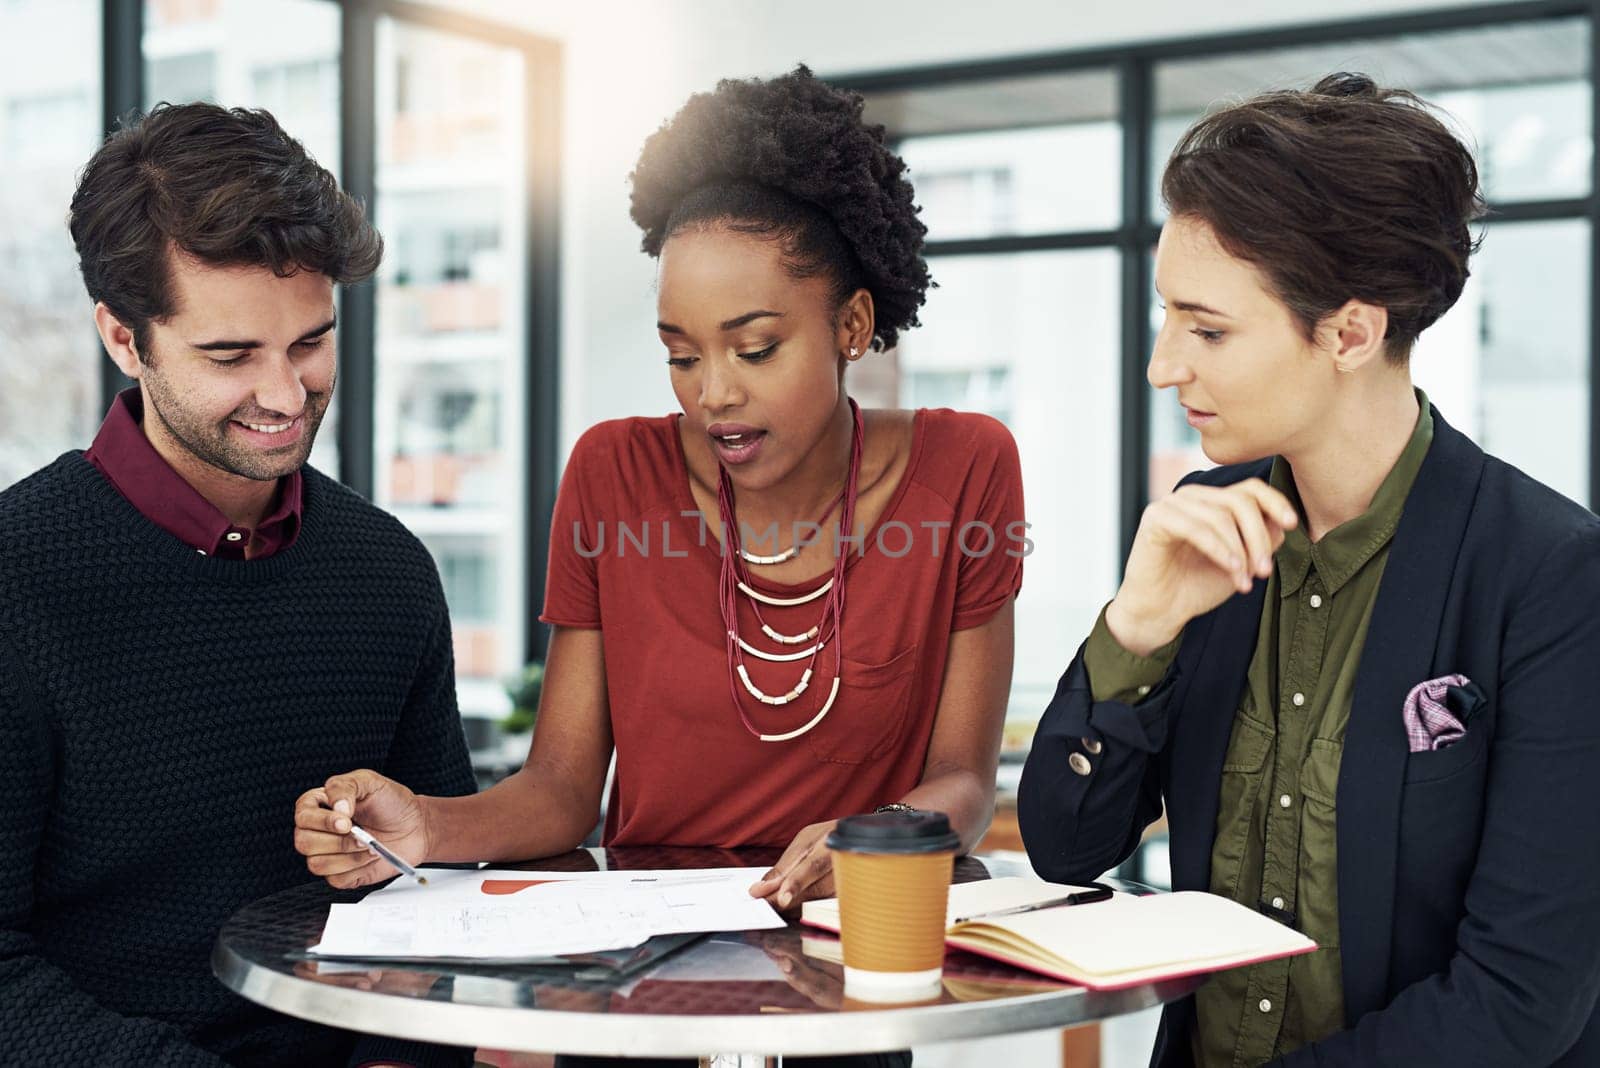 Business people, teamwork and communication .for work, planning or research at a table with coffee and documents. Corporate workers, smile and collaboration on company project with ideas and vision.